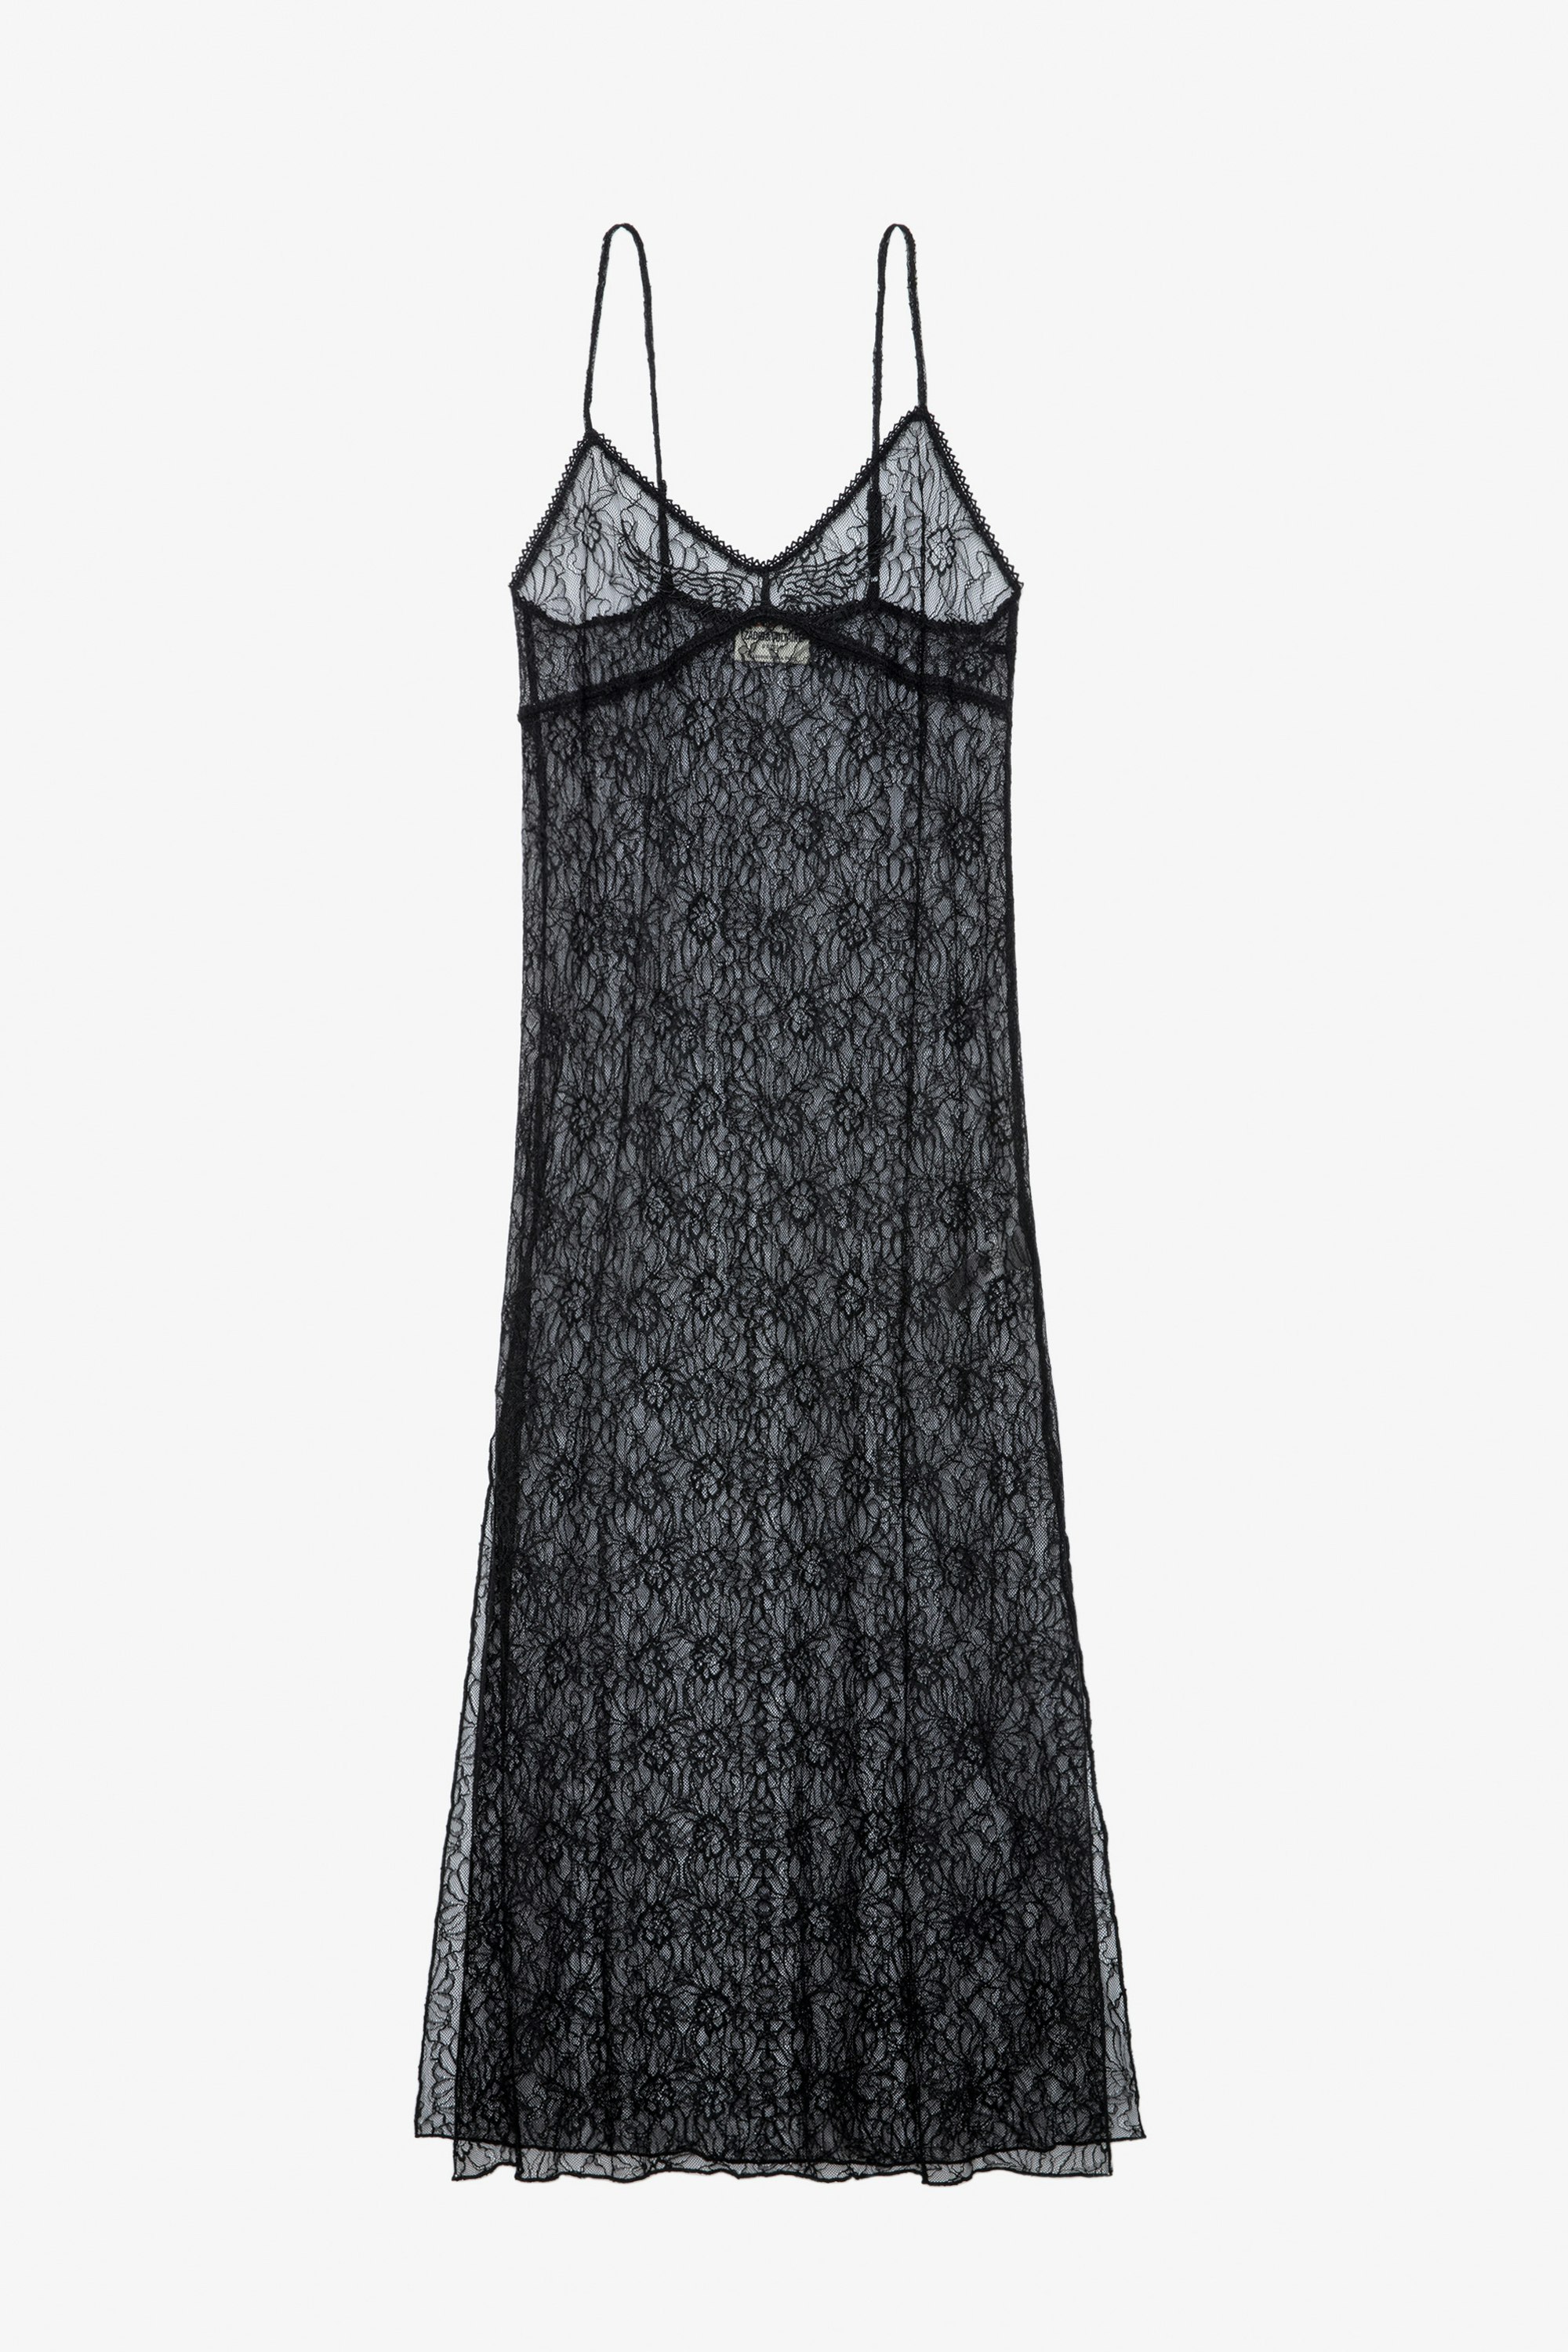 Ryzig Dress - Long sheer black lingerie-style dress with thin straps, floral lace and wings.